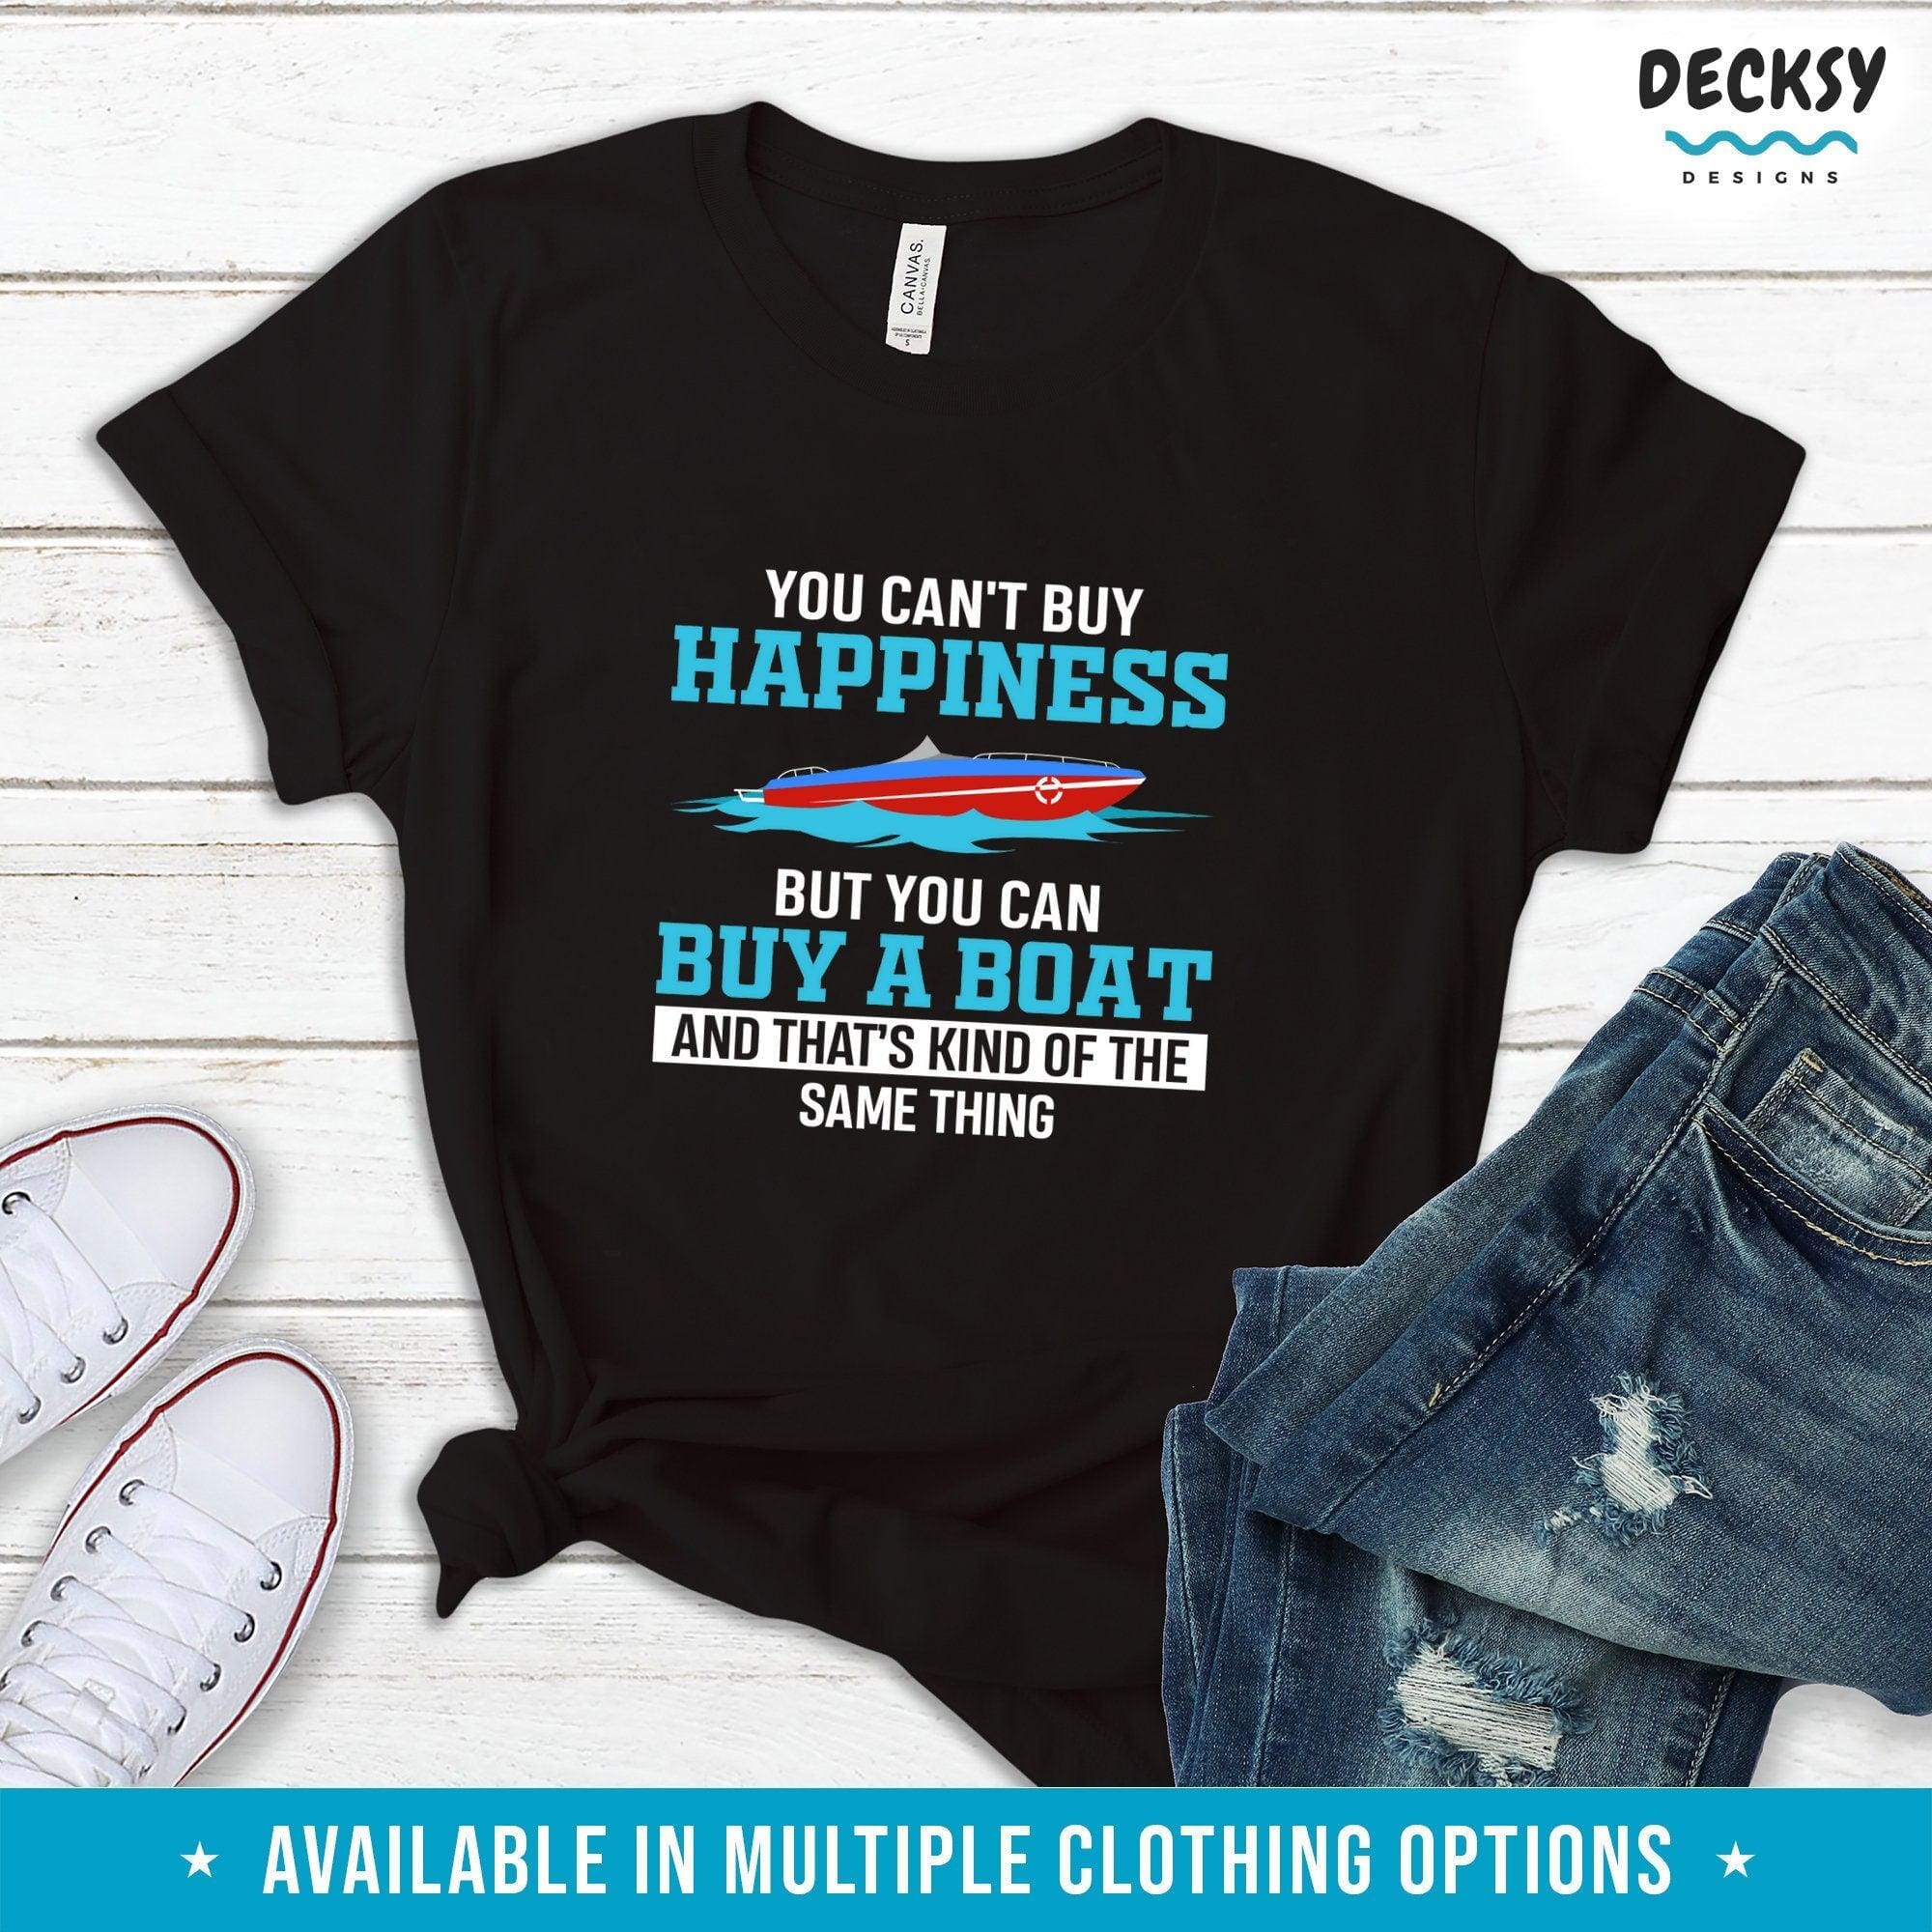 Funny Boating Shirt, Gift For Boater-Clothing:Gender-Neutral Adult Clothing:Tops & Tees:T-shirts:Graphic Tees-DecksyDesigns